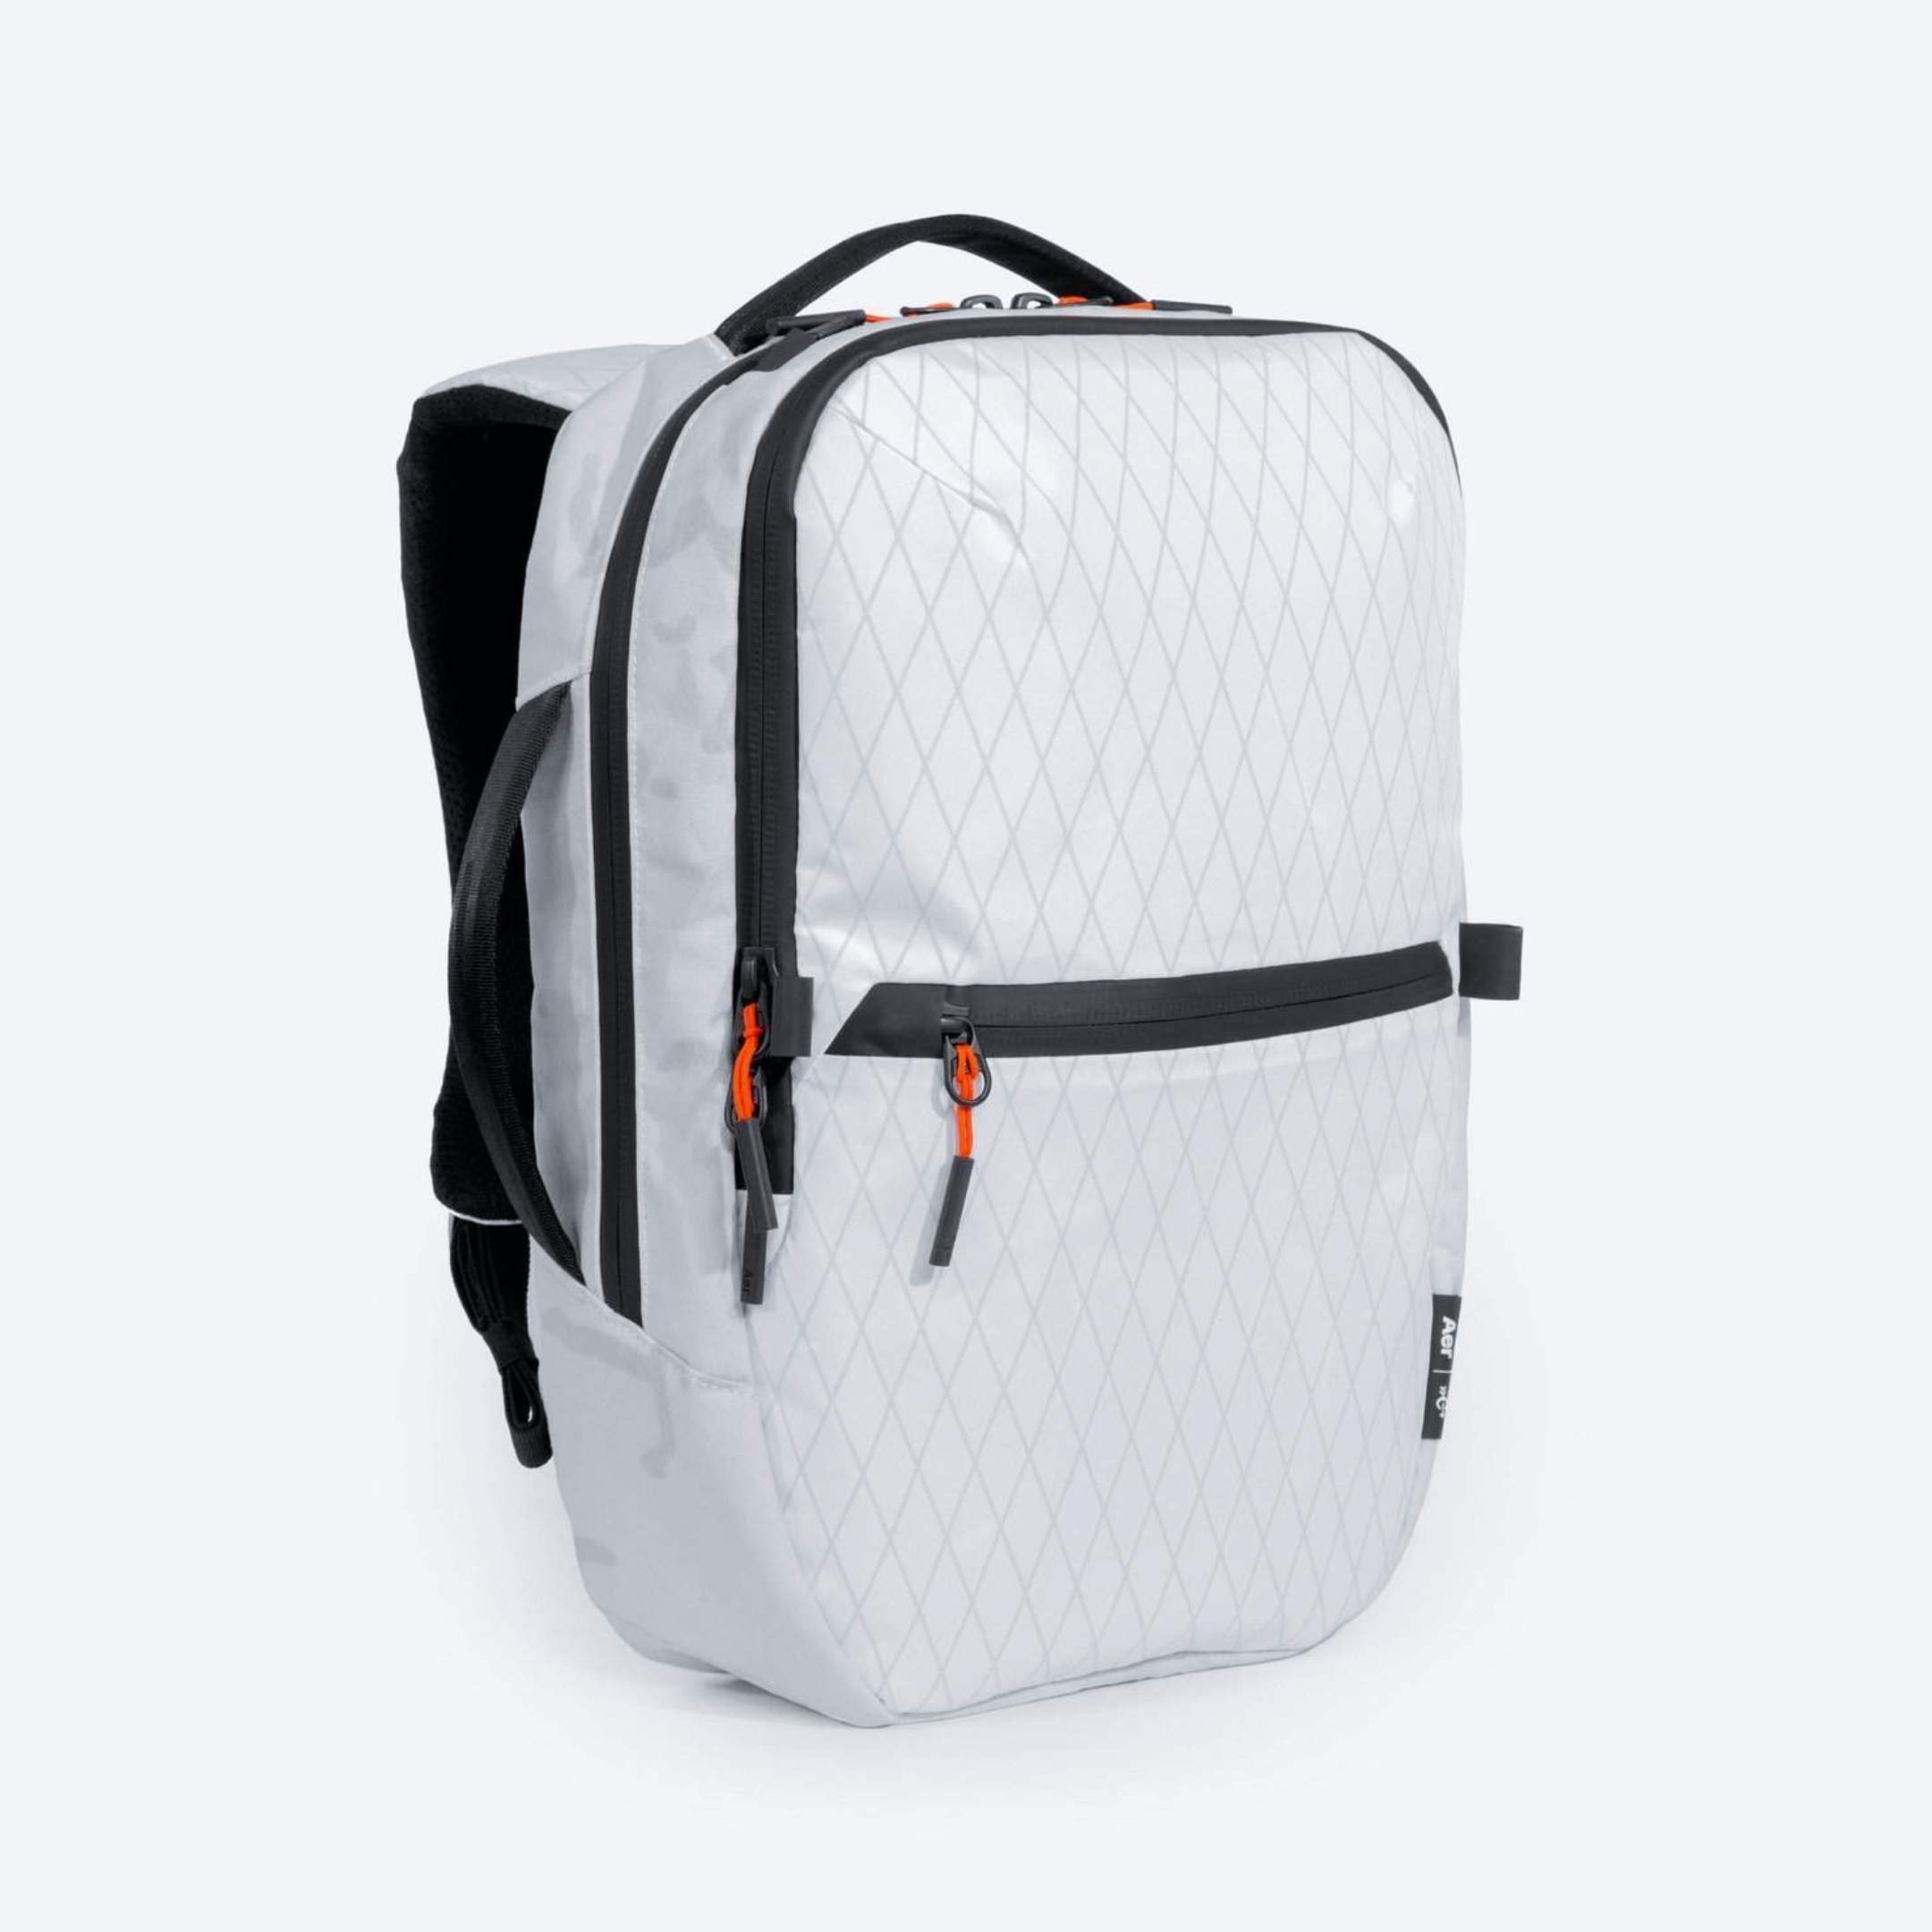 Aer x Carryology Tokai Pack Backpack